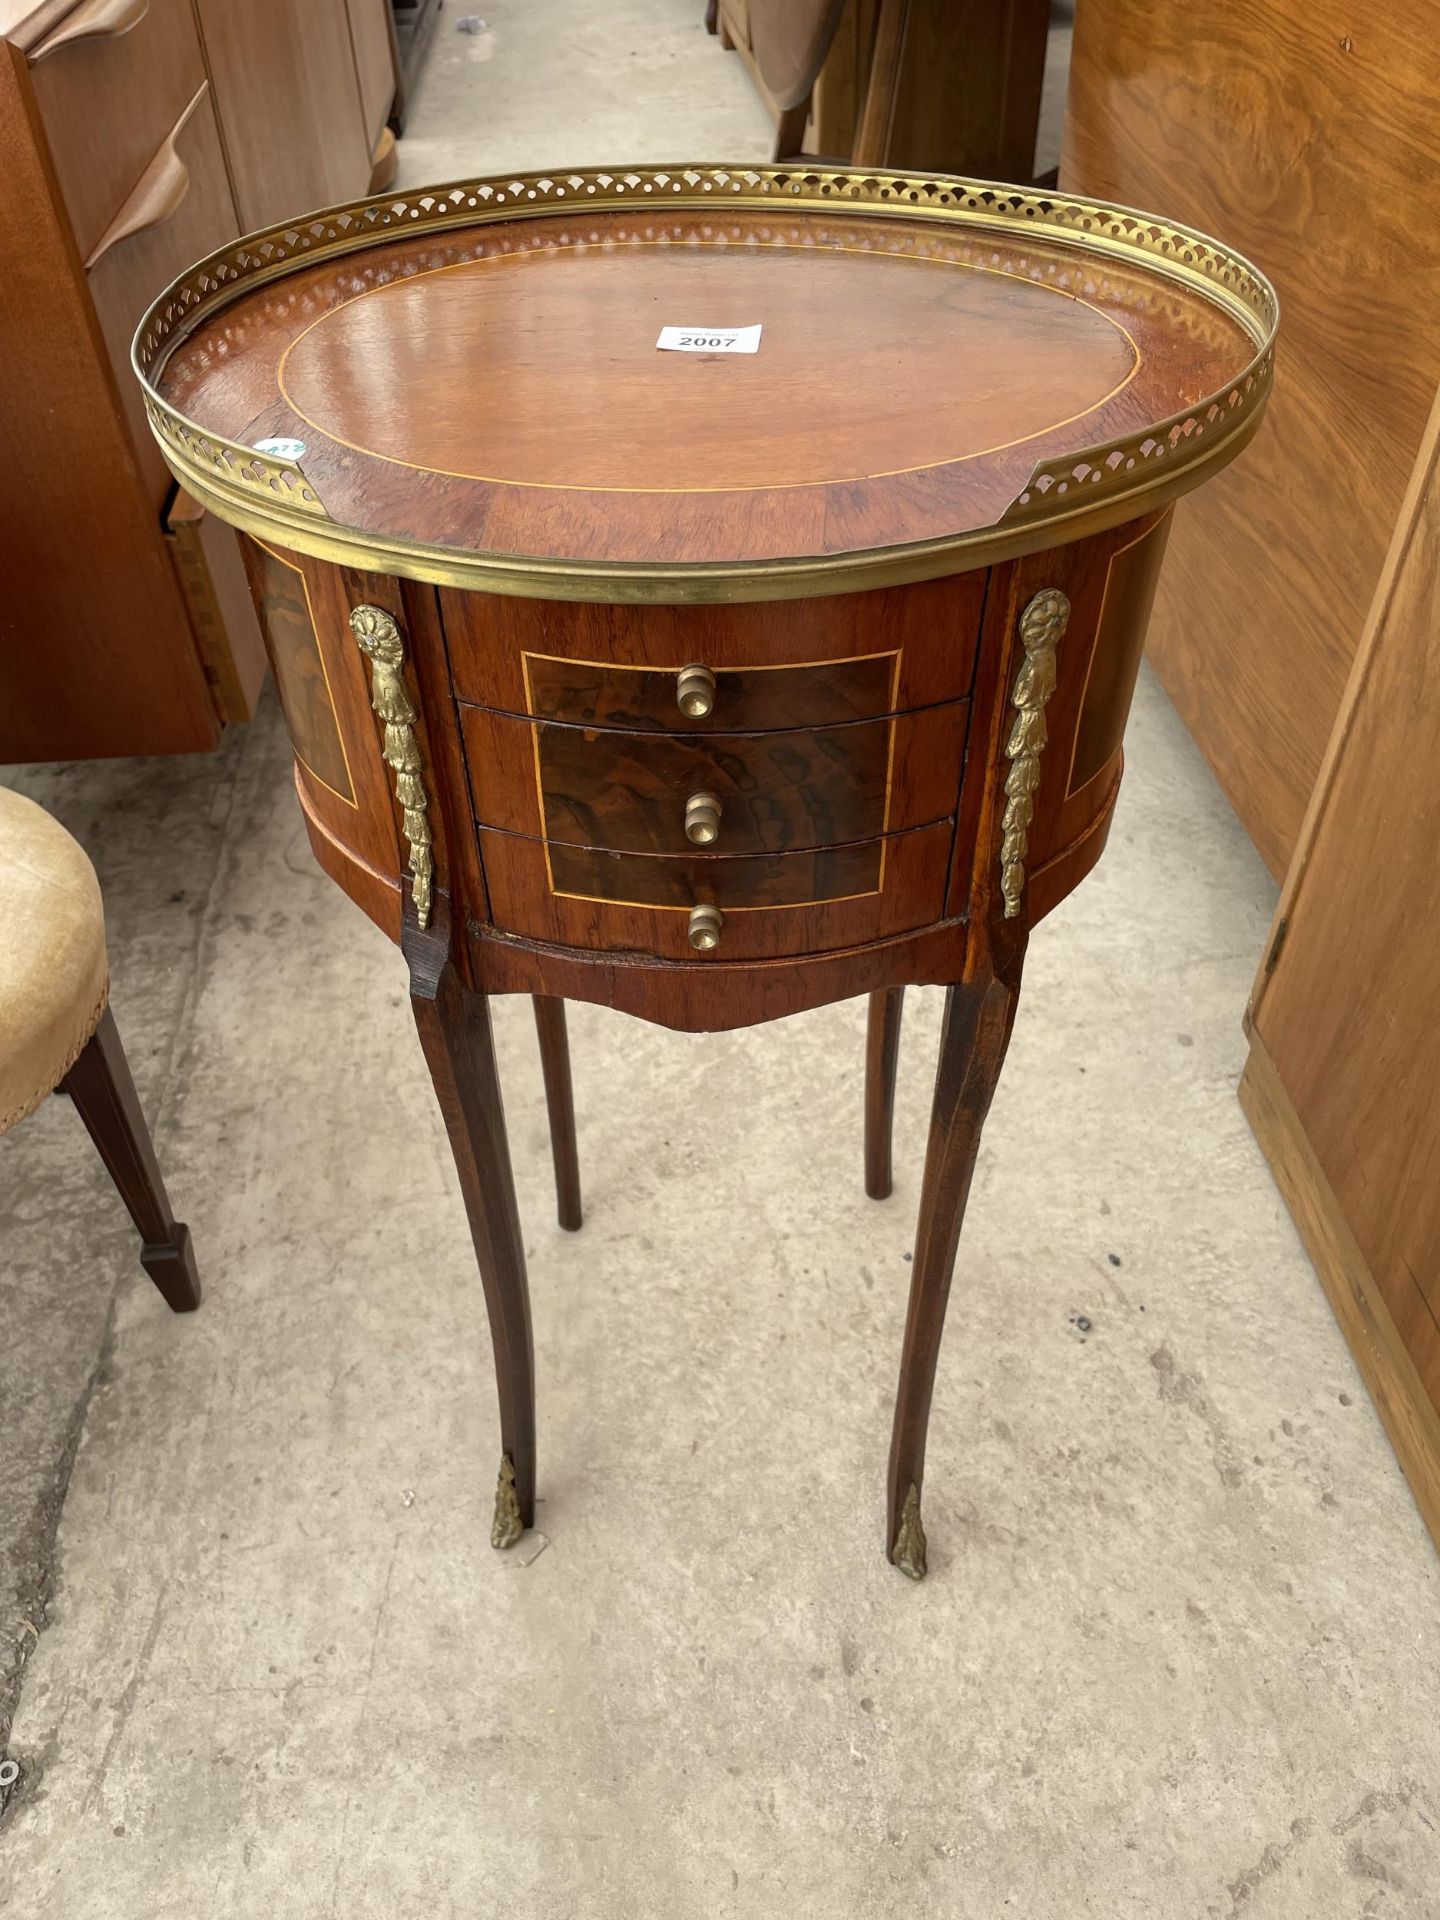 AN OVAL LOUIS XVI STYLE WALNUT SIDE TABLE WITH THREE SMALL DRAWERS, BRASS PIERCED GALLERY AND